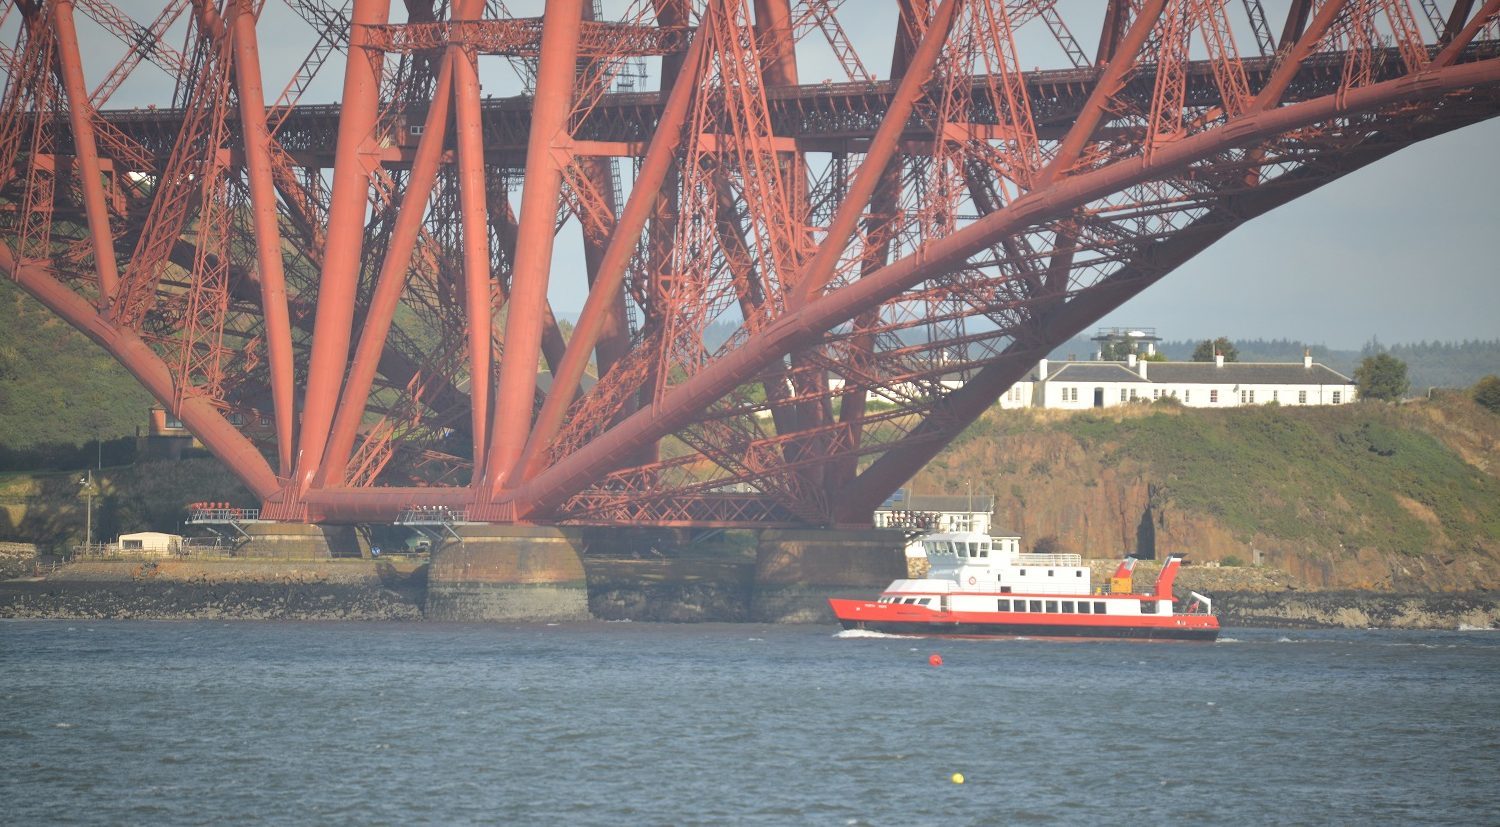 The Forth Hope sails under the Forth Bridge